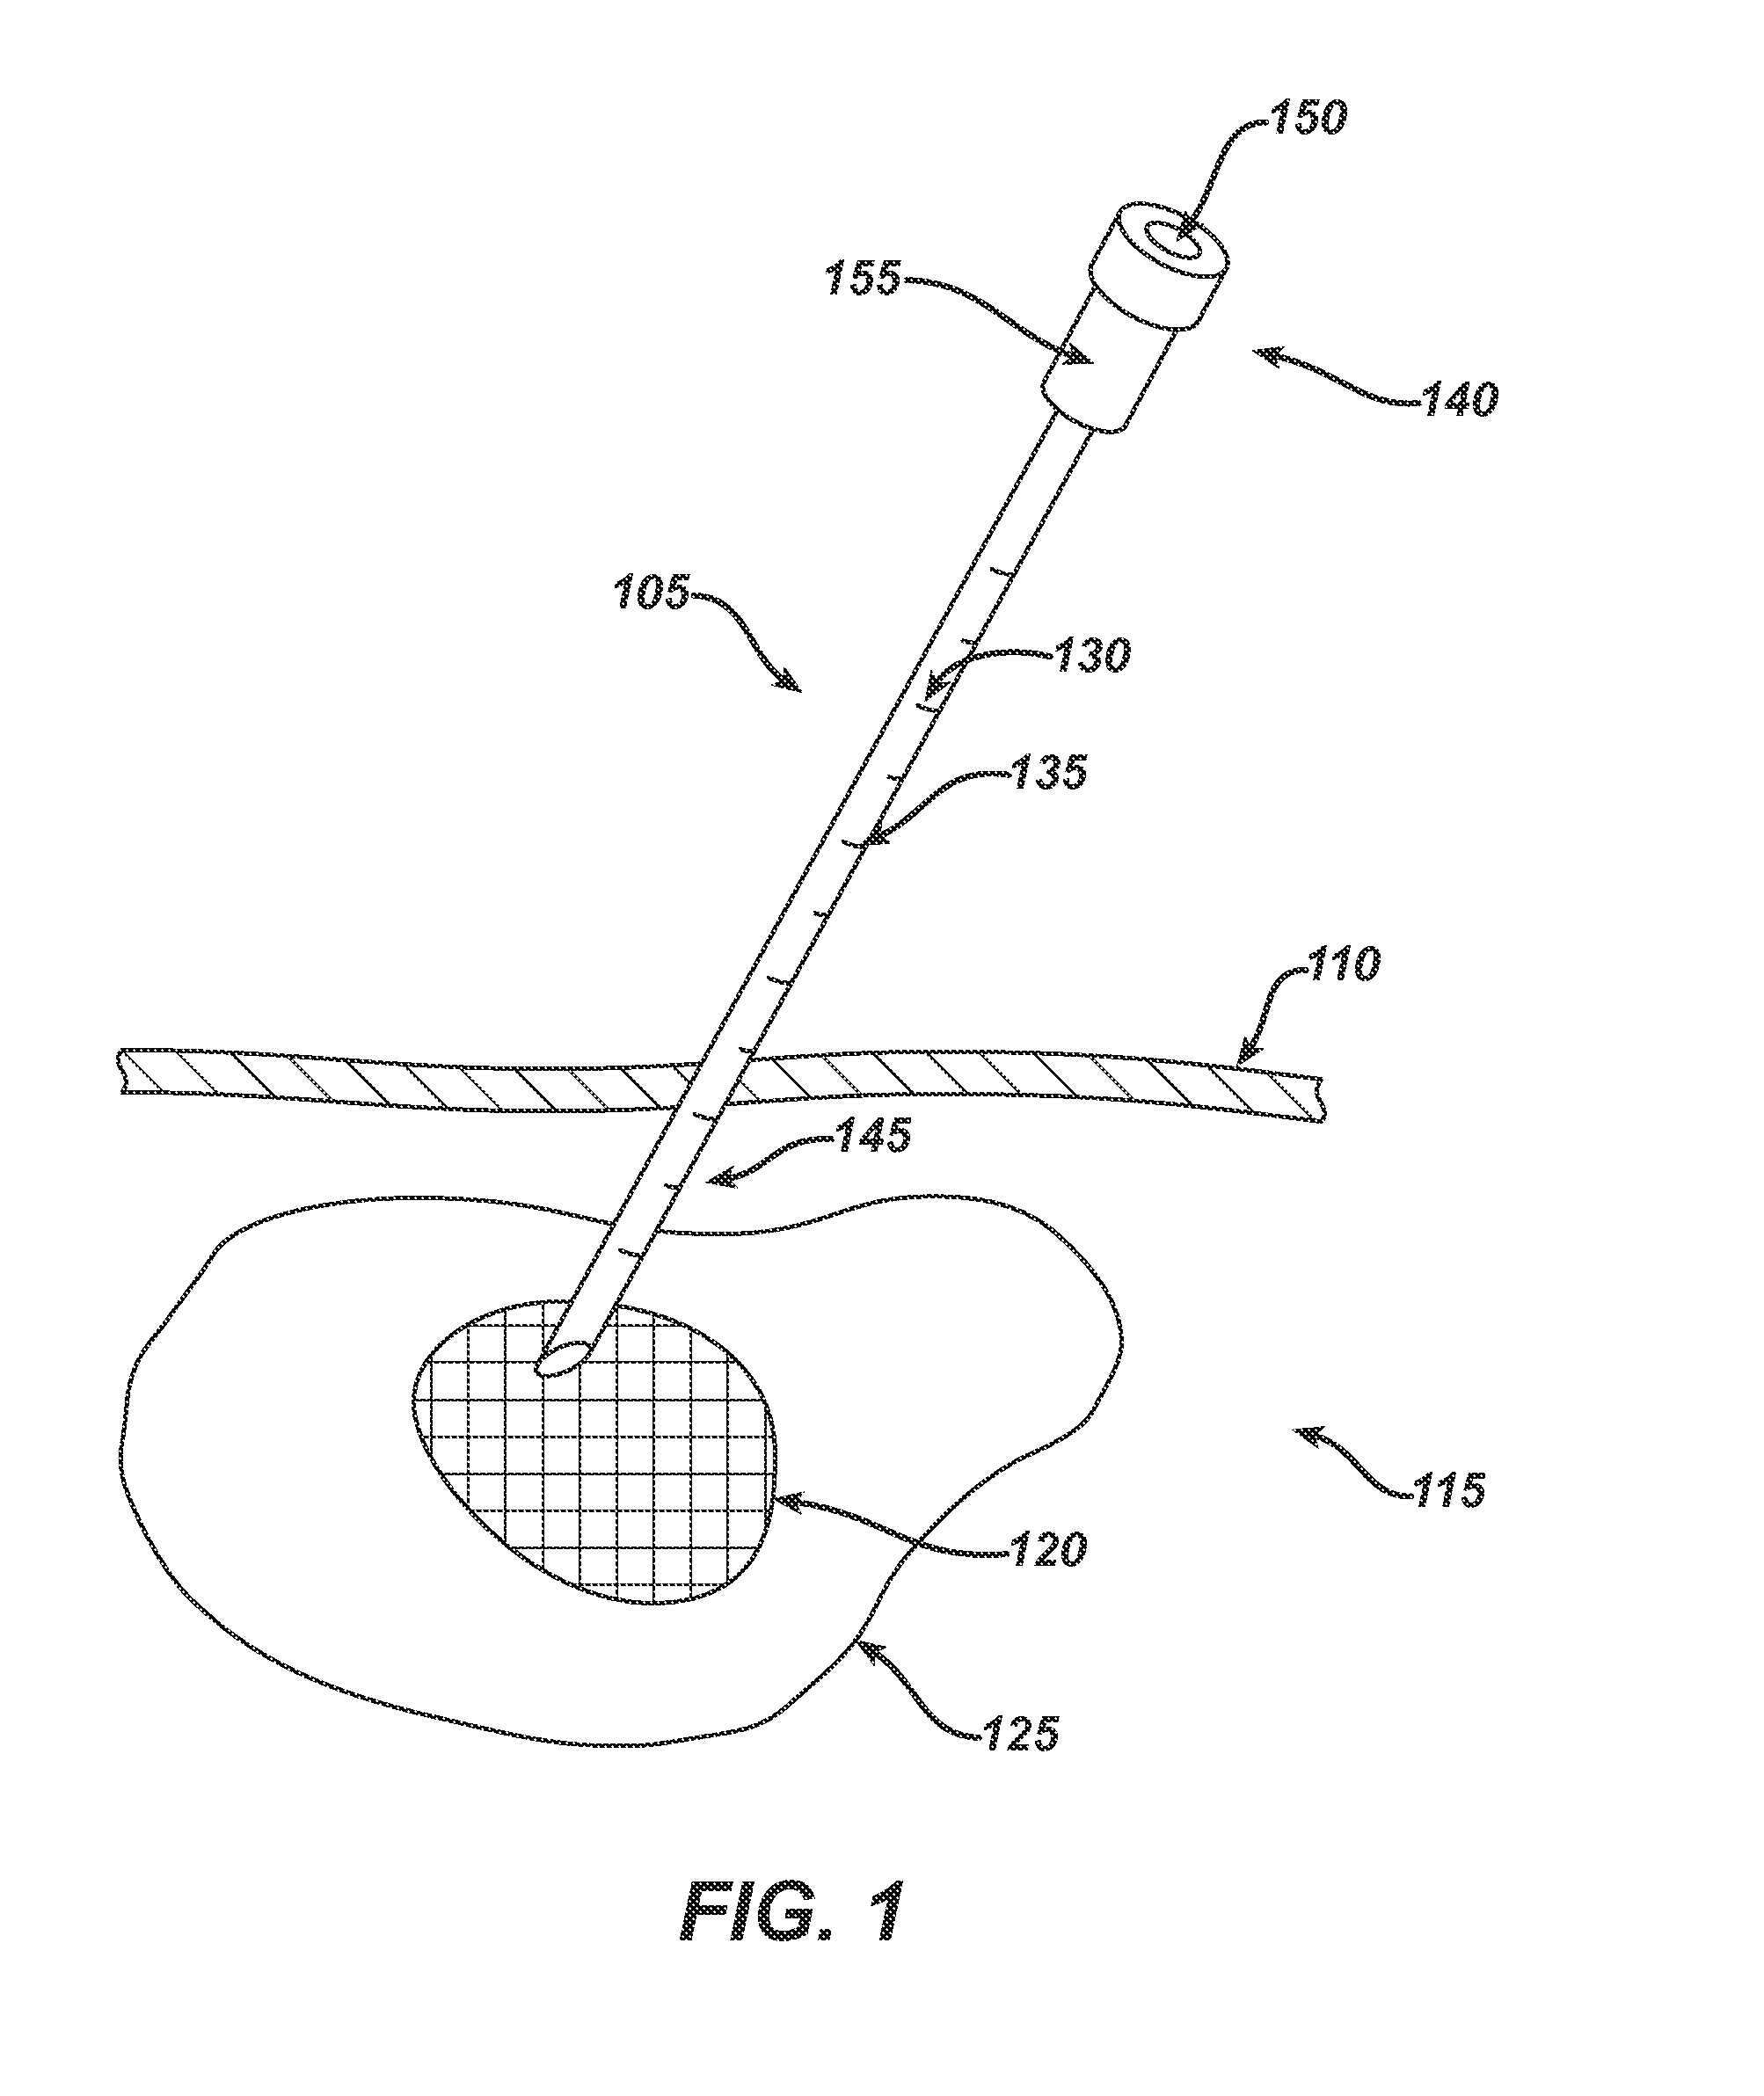 System and Method for Targeted Delivery of Therapeutic Agents to Tissue